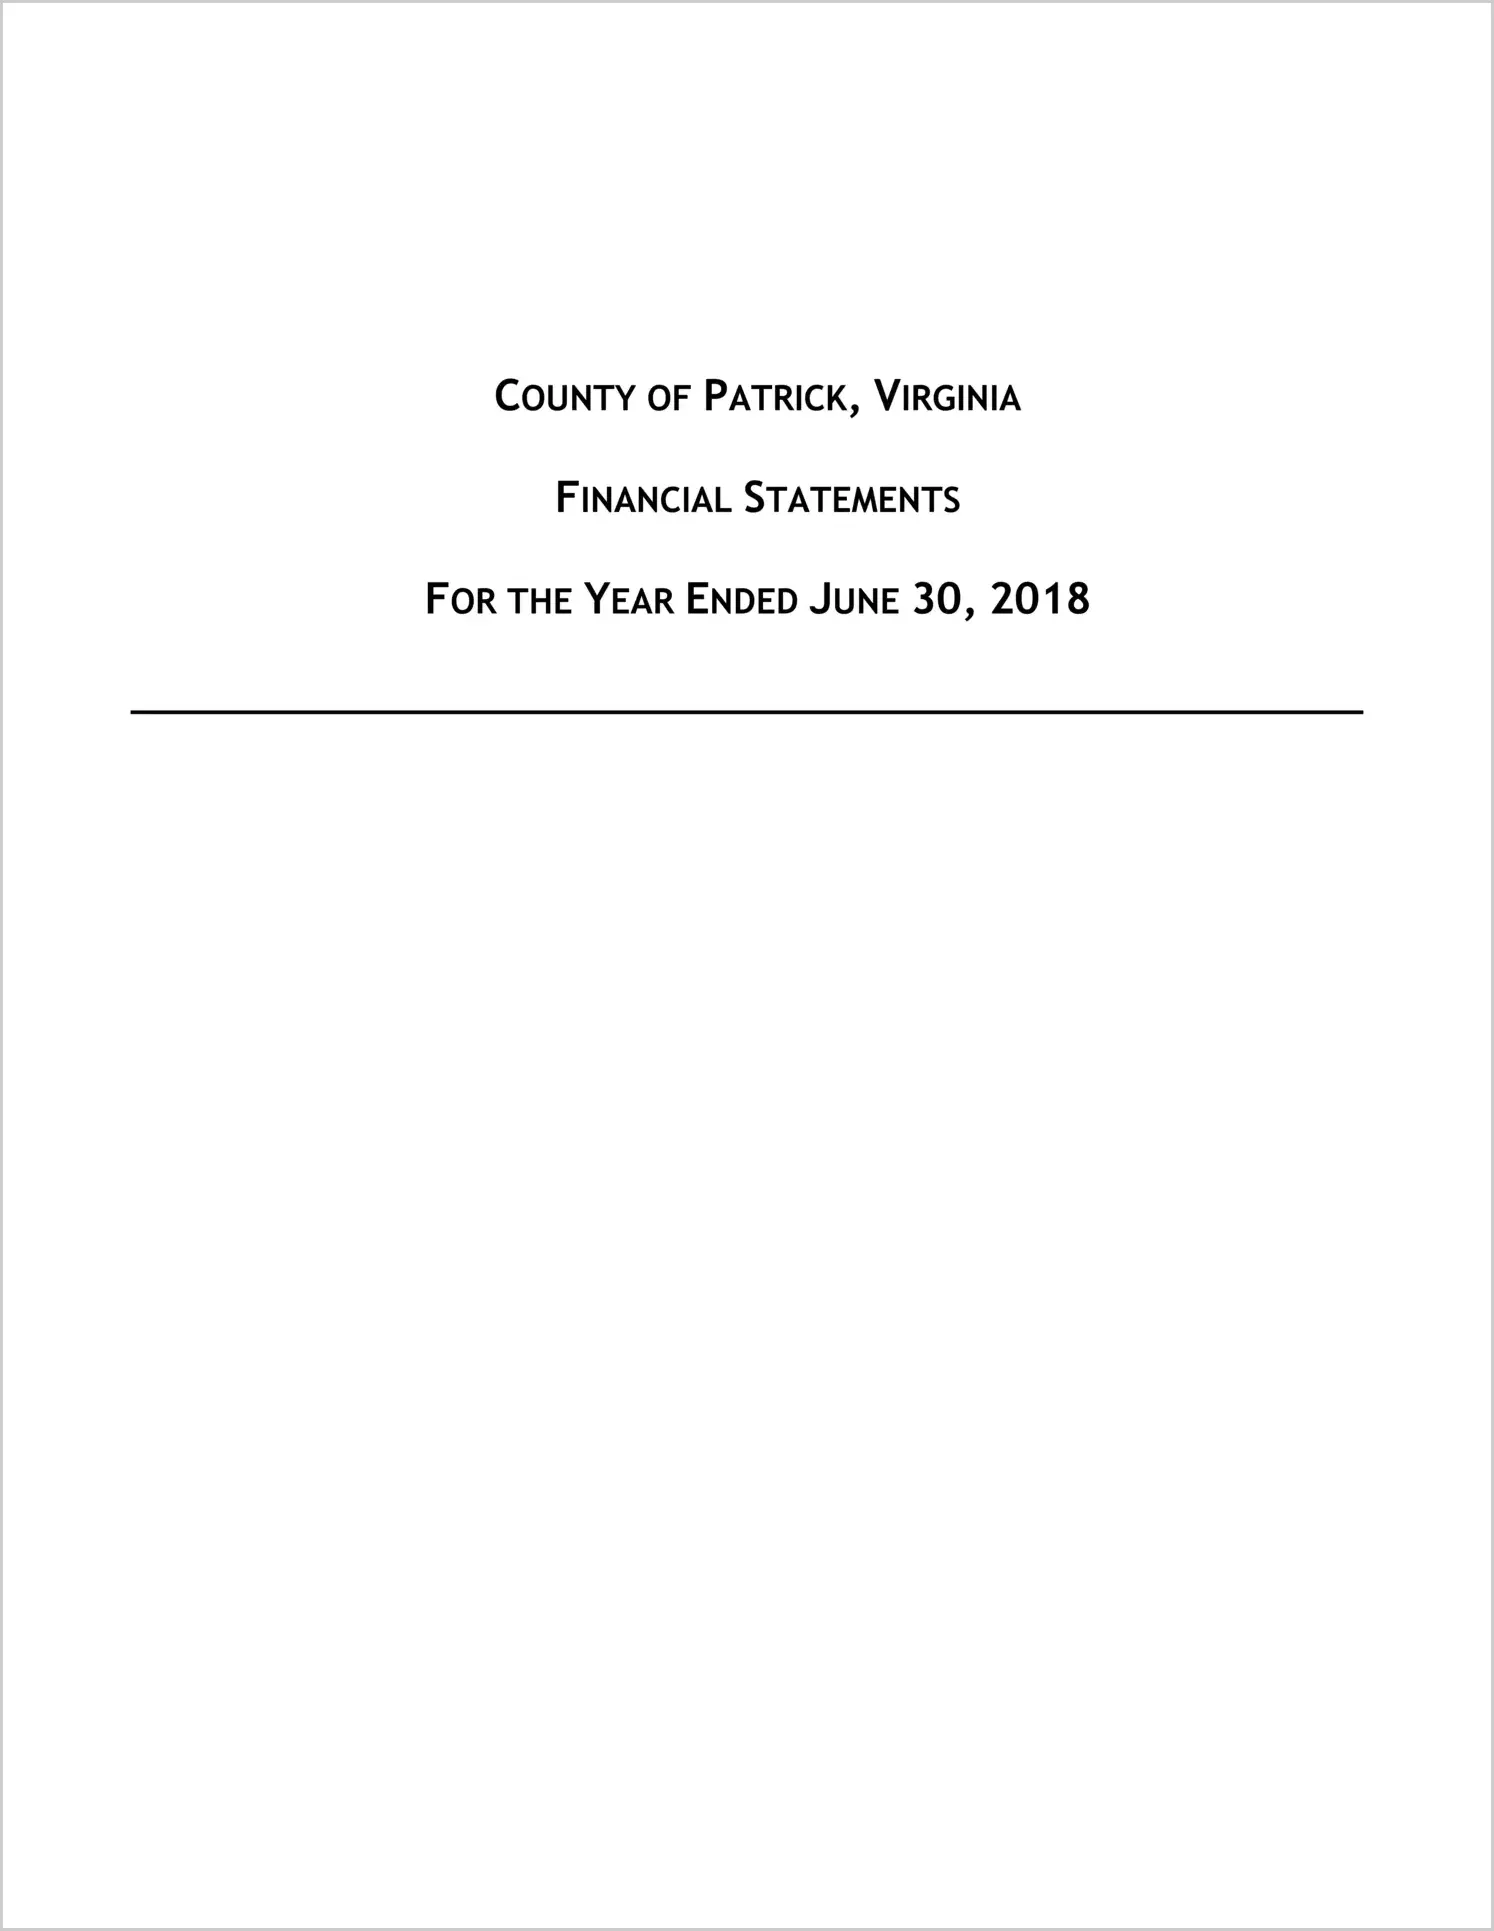 2018 Annual Financial Report for County of Patrick